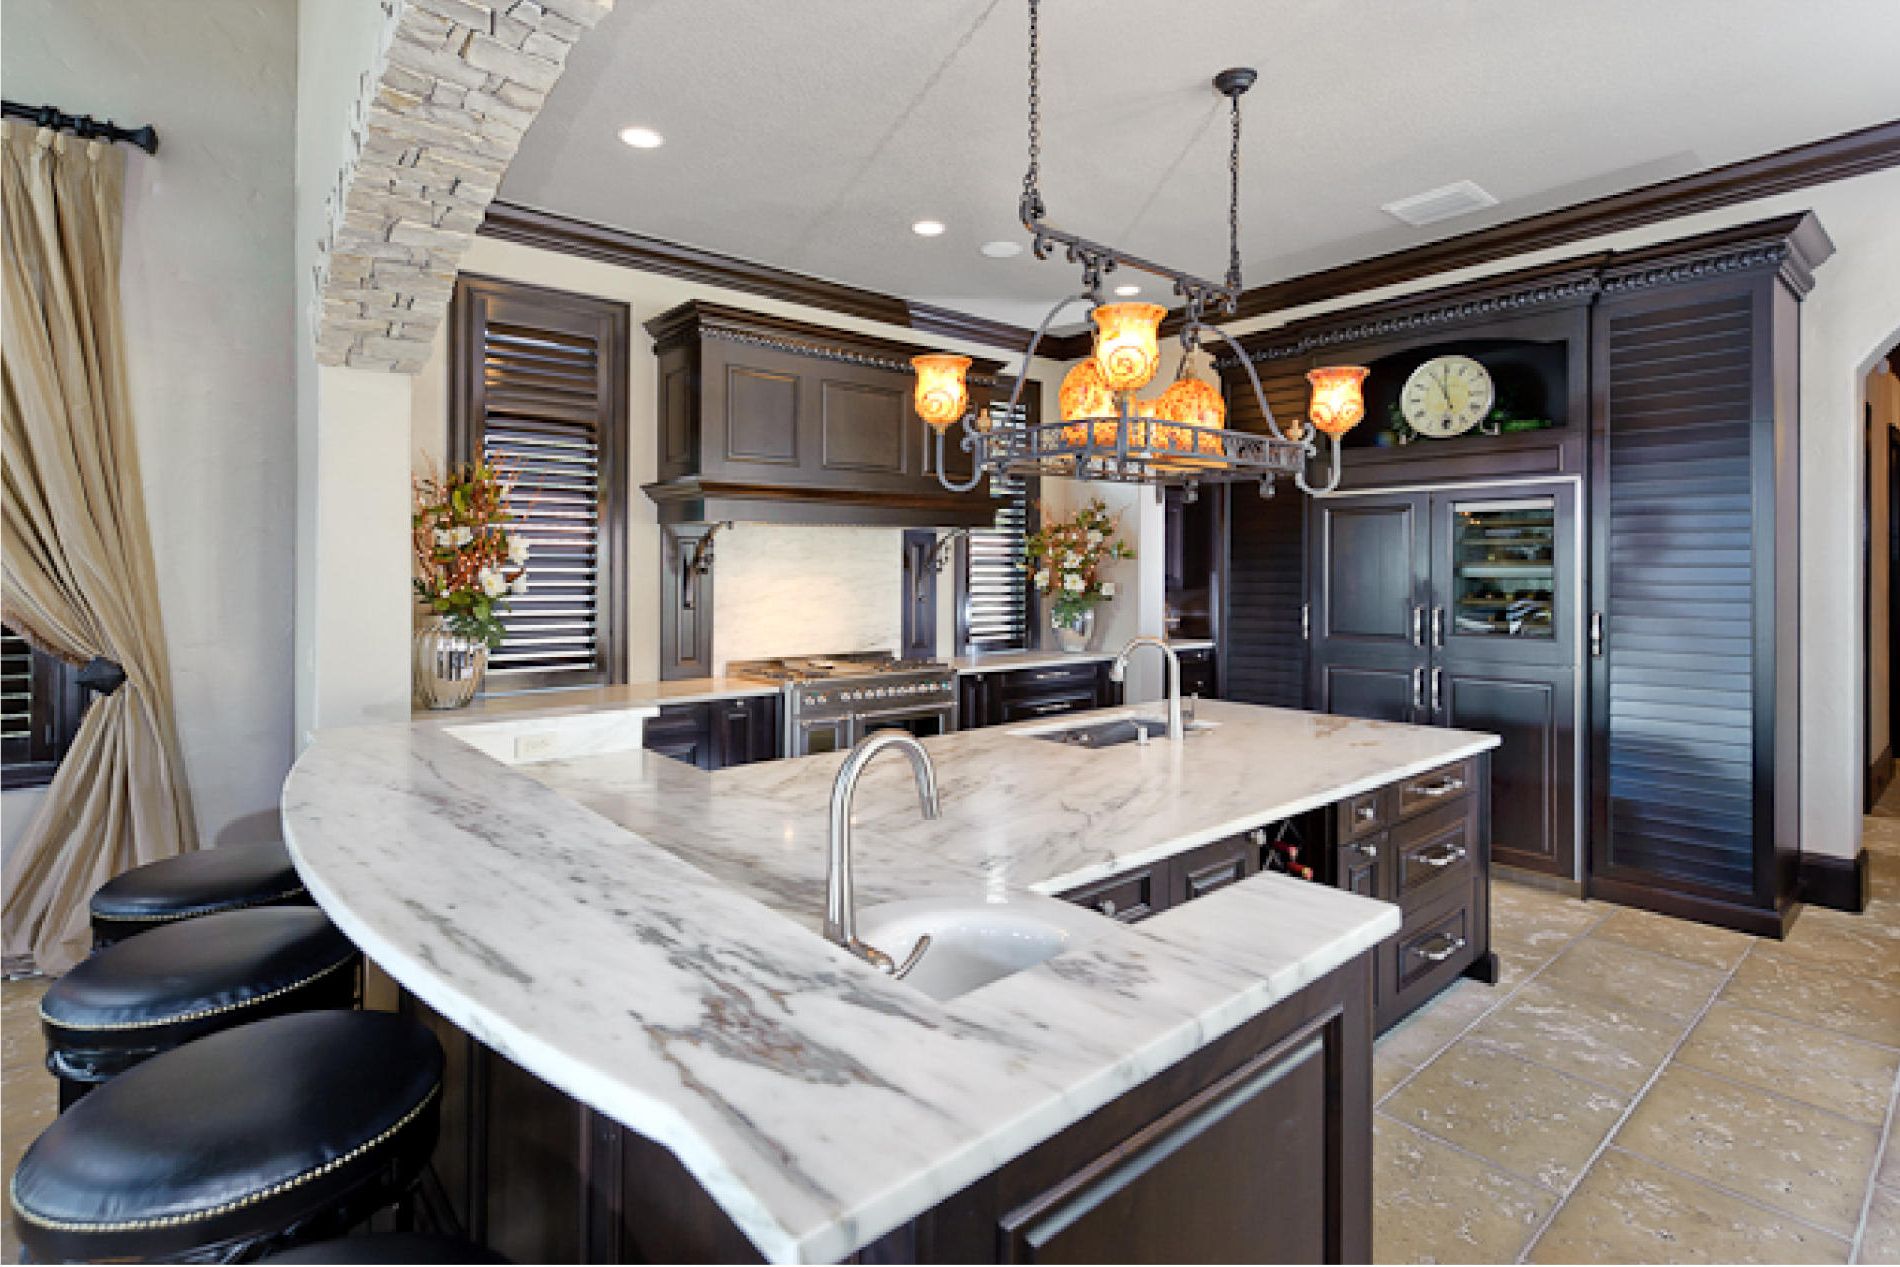 Kitchen Island Lighting System With Pendant And Chandelier With Popular Kitchen Island Light Chandeliers (View 2 of 20)